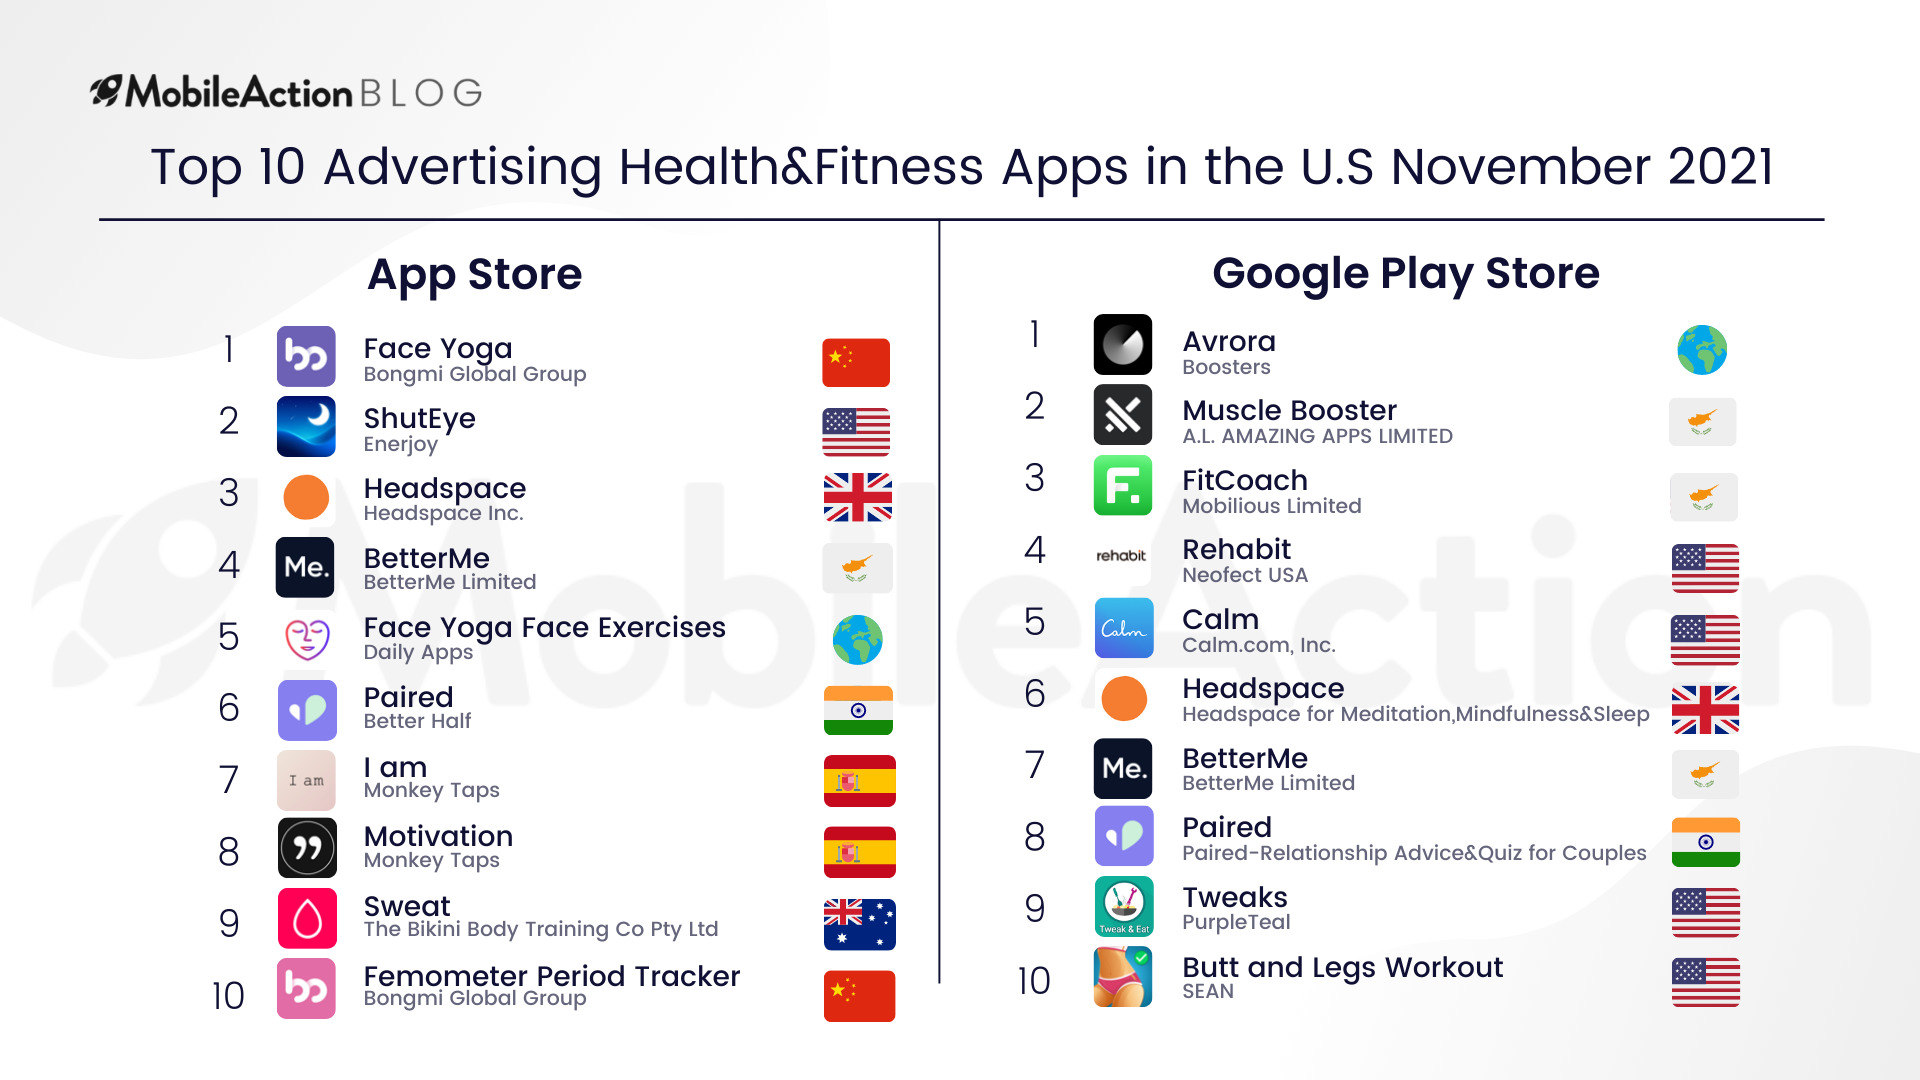 Top 10 Advertising Health and Fitness Apps in the U.S November 2021